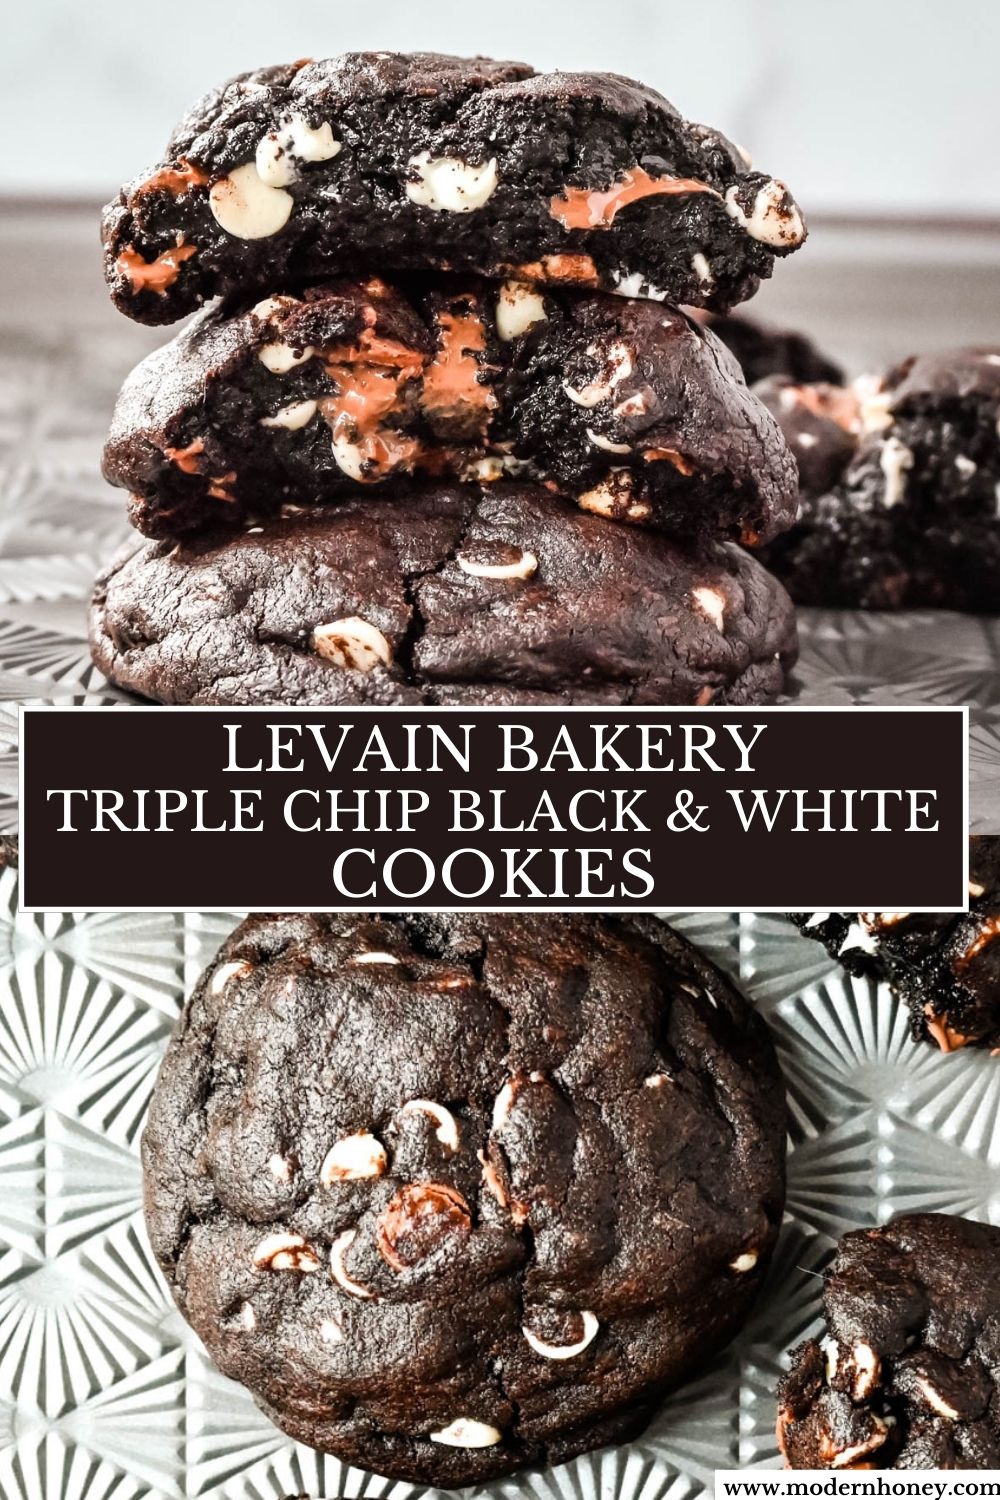 This Levain Bakery Black and White Cookie is a soft, thick, and chewy dark chocolate cookie with white chocolate and milk chocolate chips. It is a bakery-style triple chocolate chip cookie recipe for chocolate lovers!